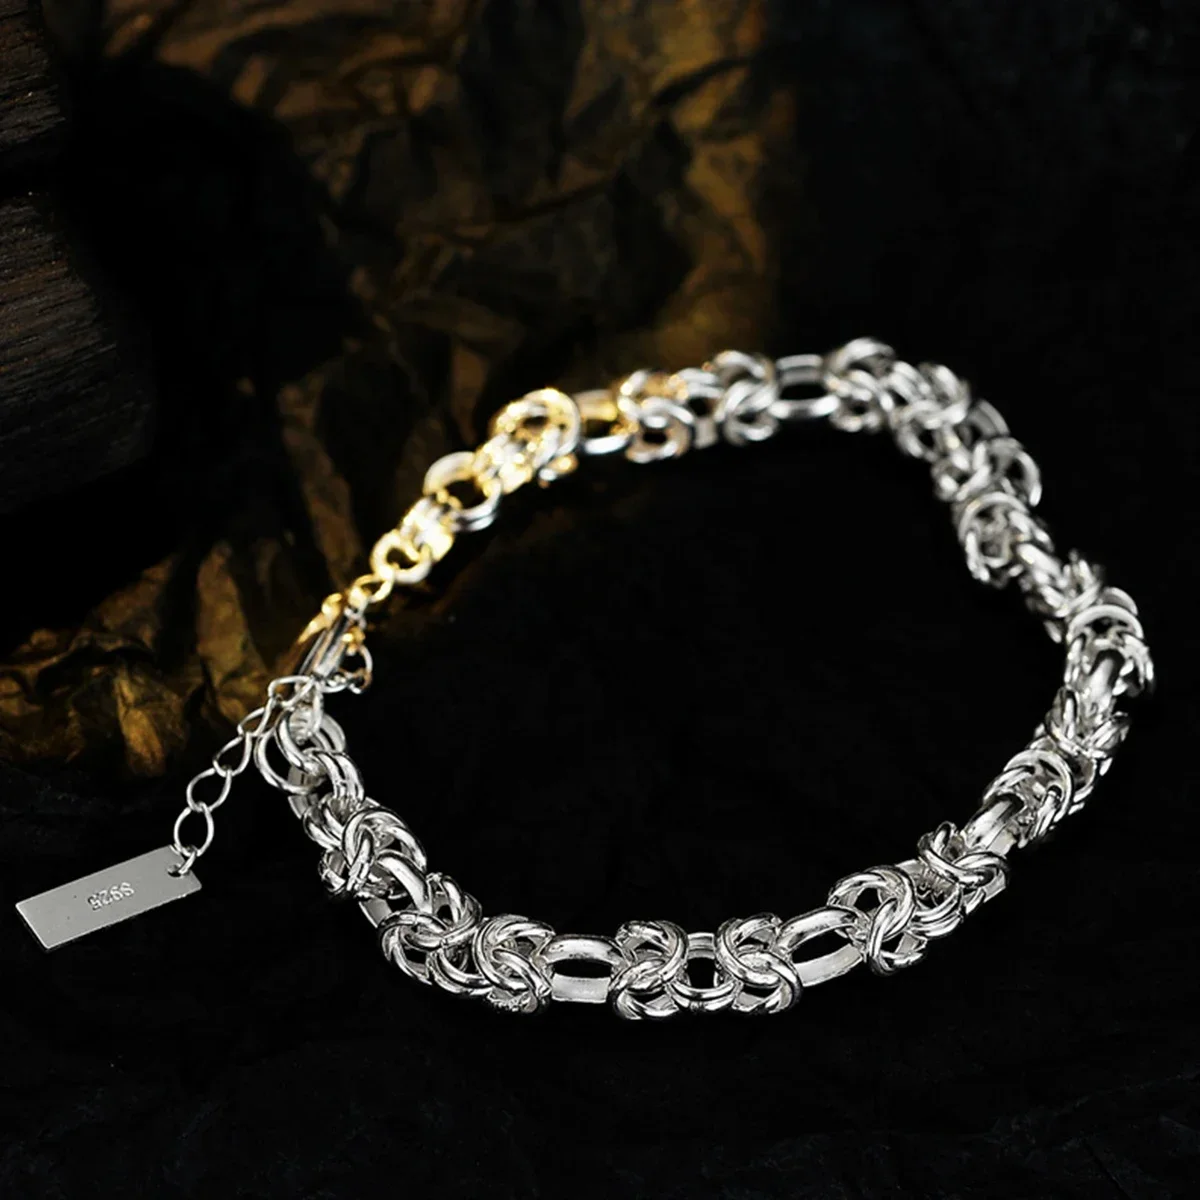 

Fashionable Classic S925 Sterling Silver Geometric Chain Bracelet for Men and Women's Party Bracelets, Wedding Jewelry Gifts